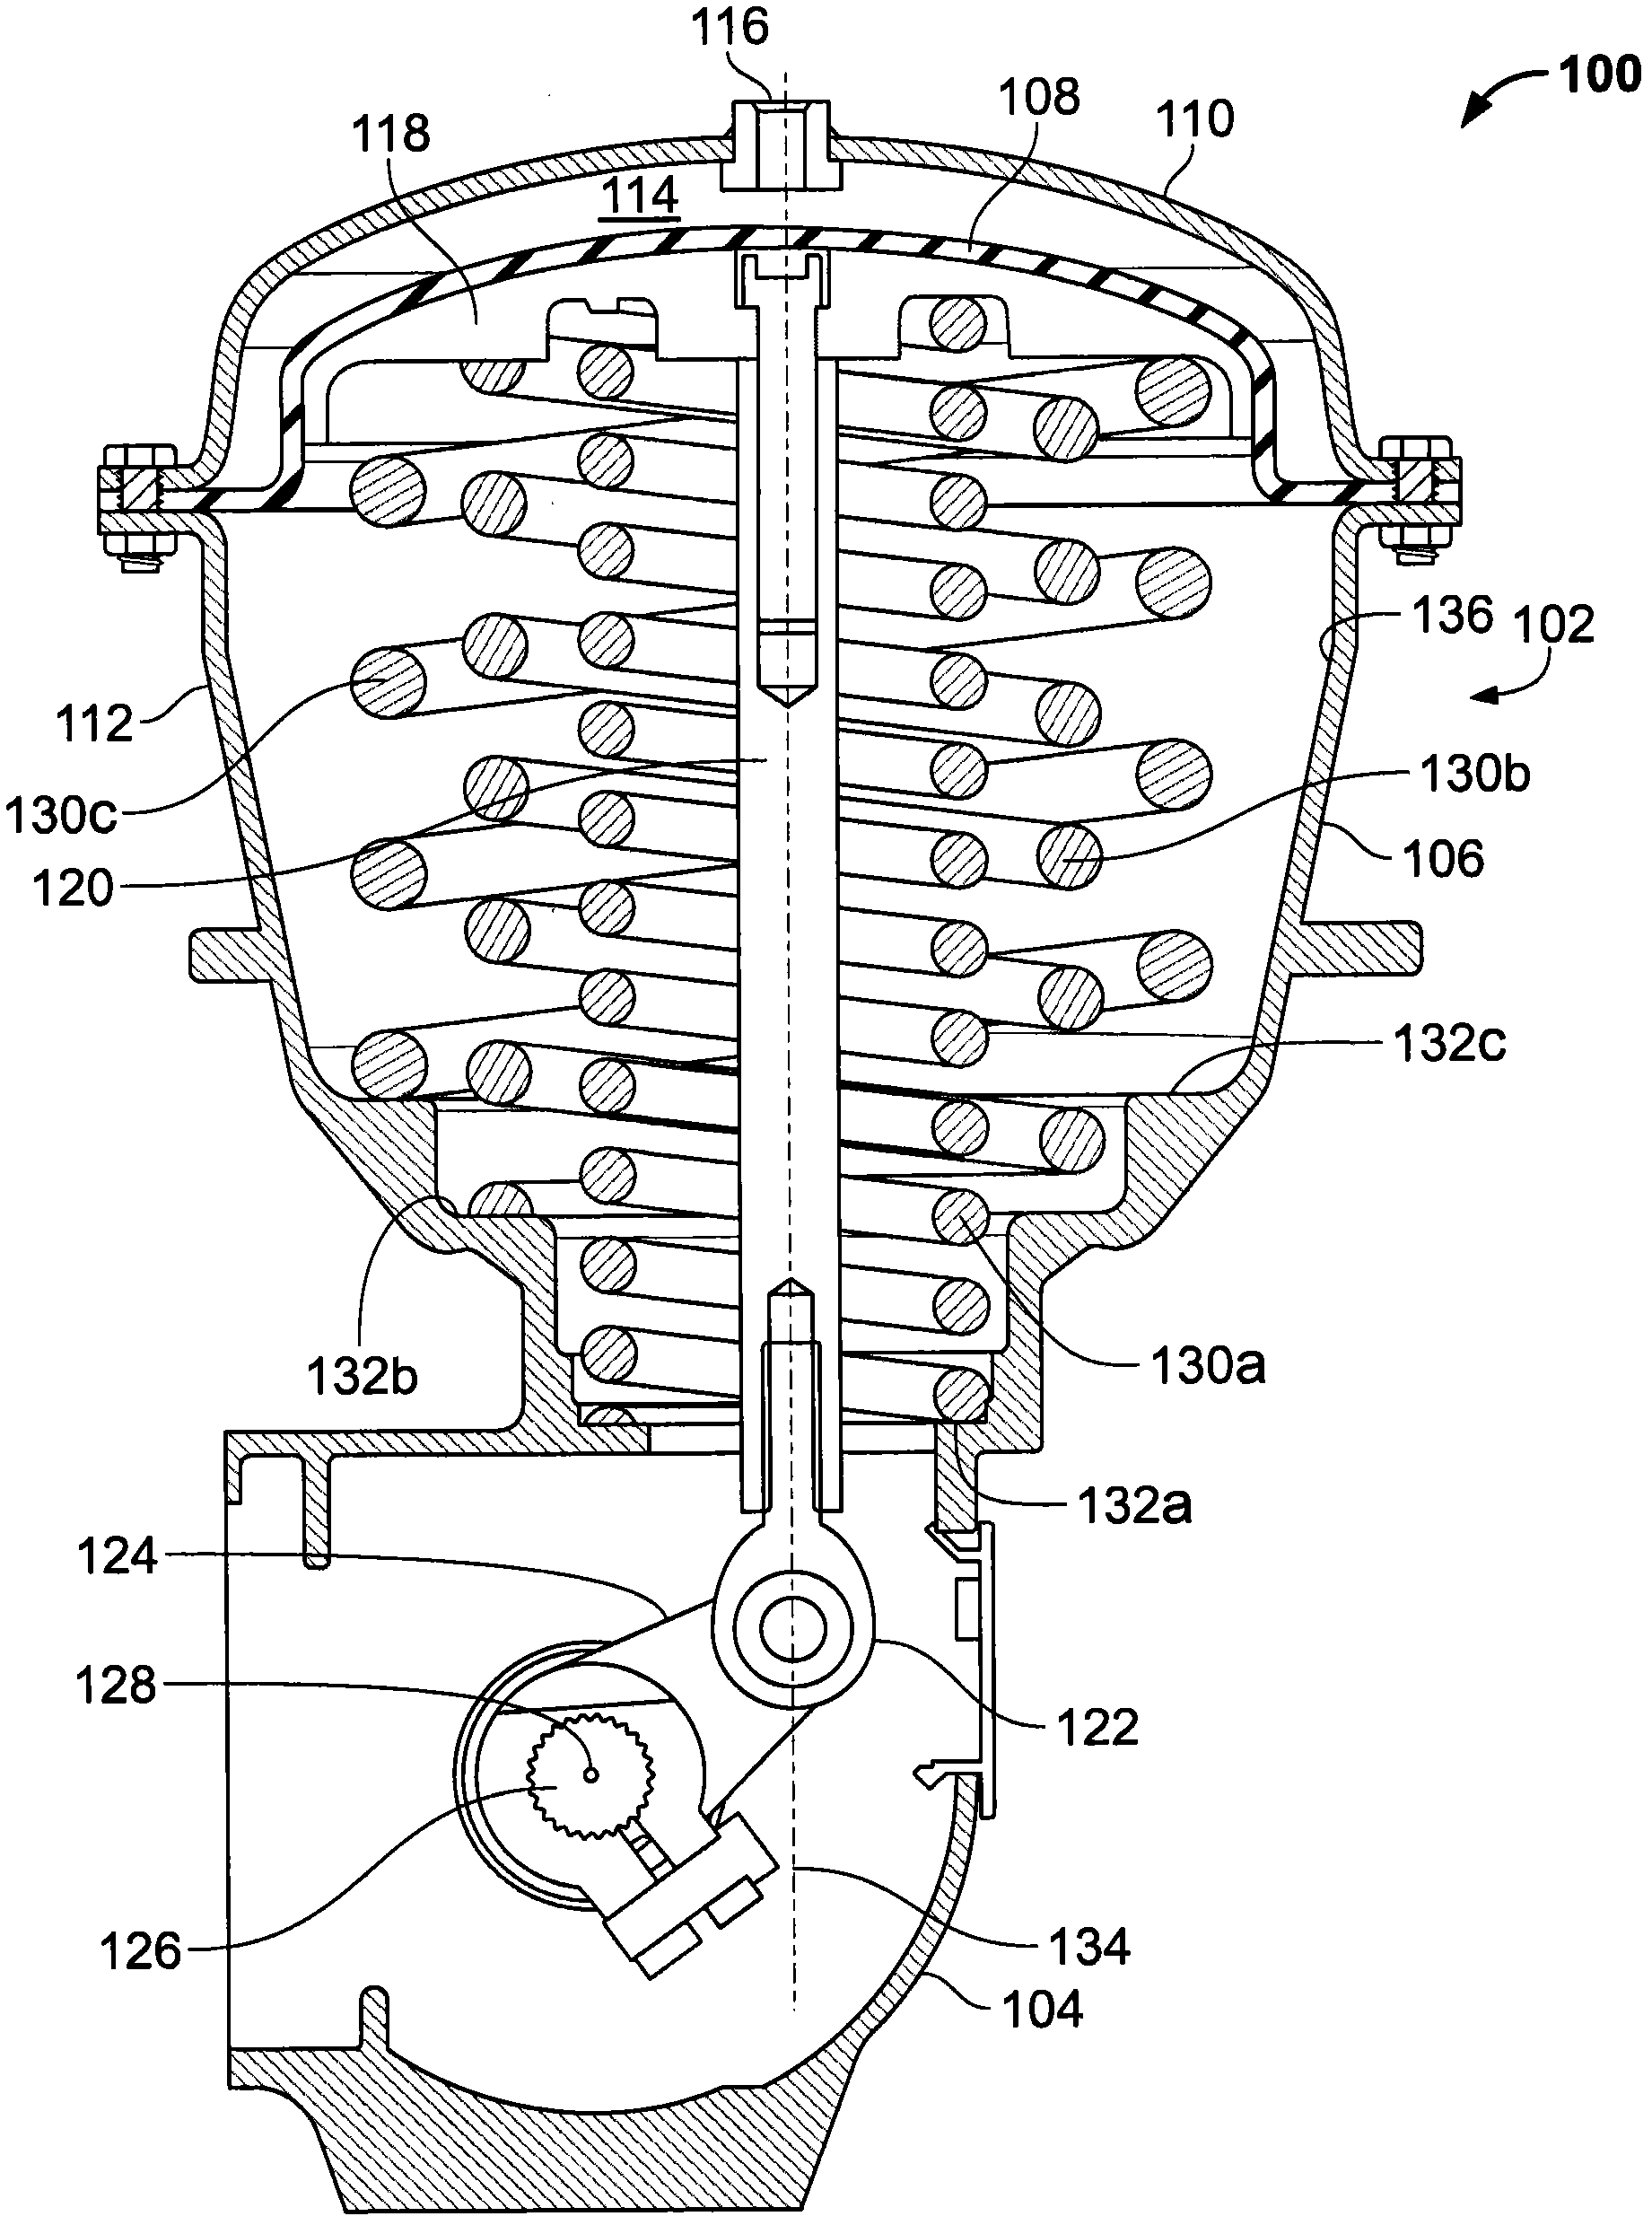 Stem guide apparatus for use with fluid valve actuators